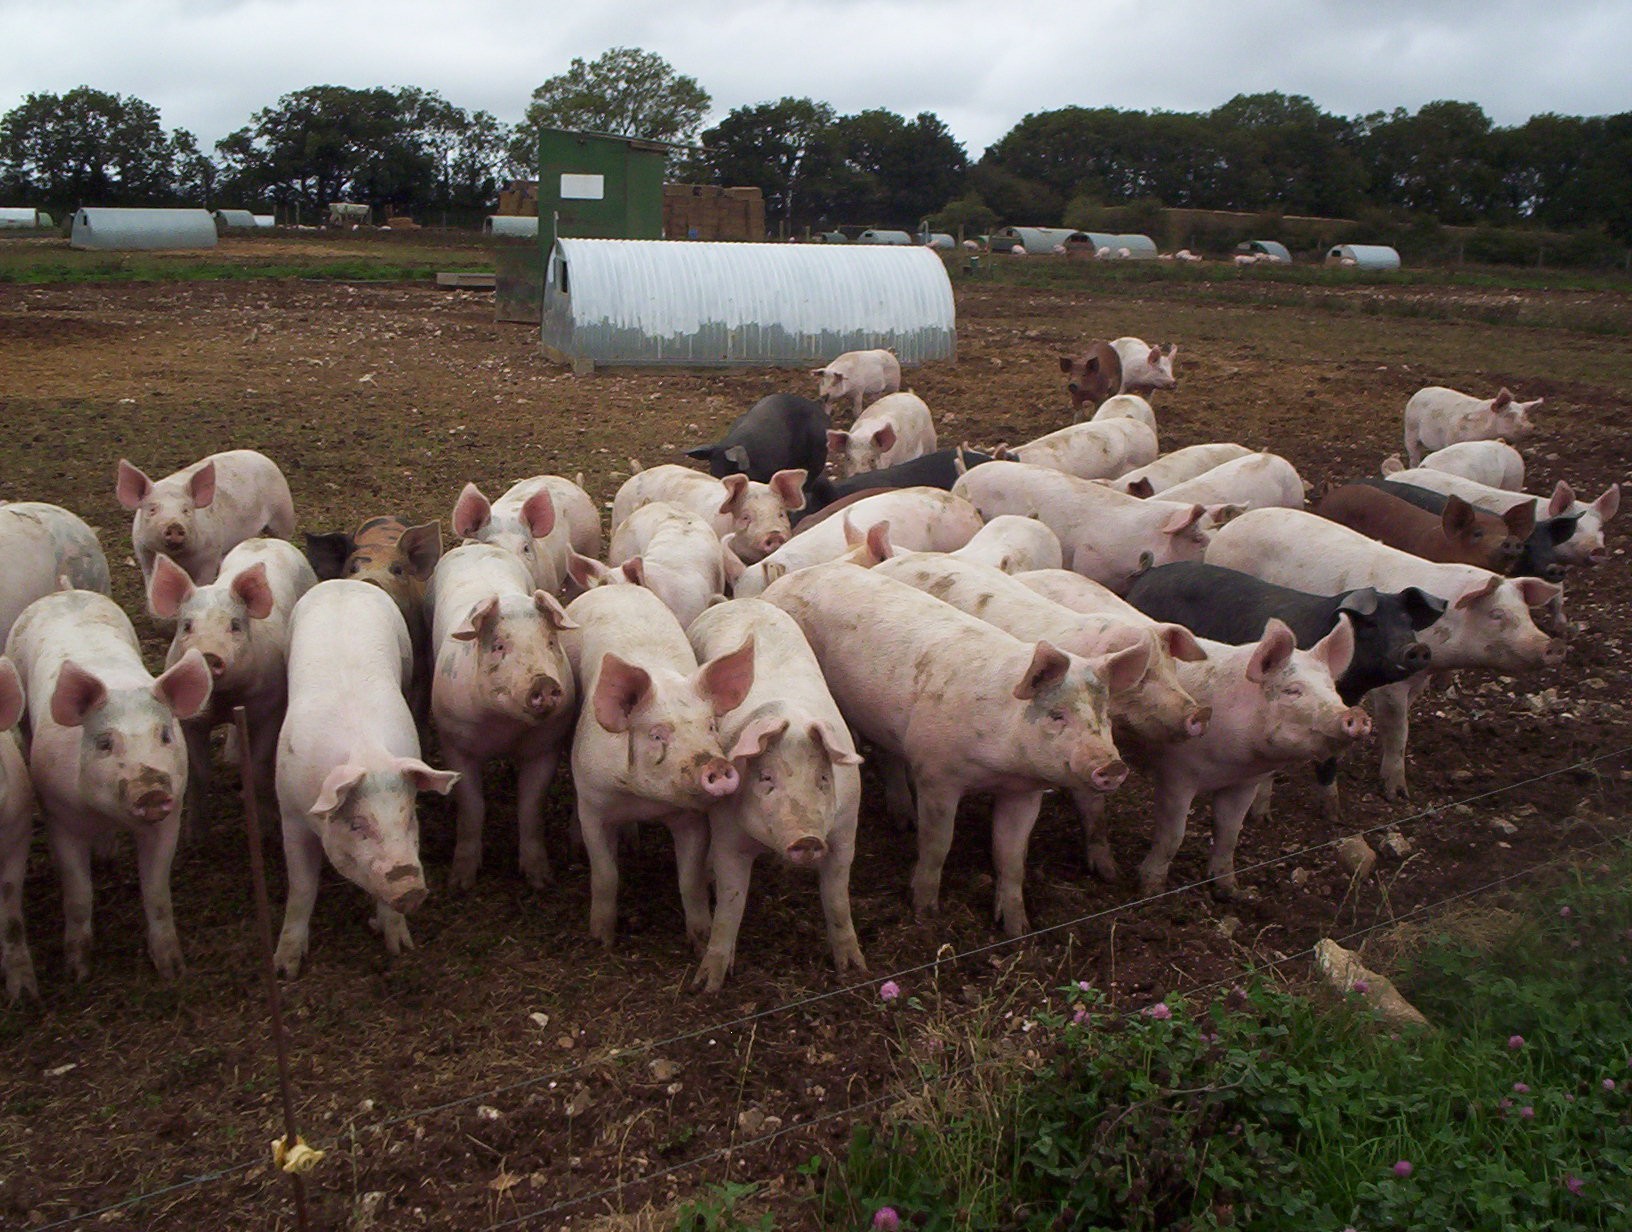 New Project, PigProGrAm, aims to reduce the environmental impact of ammonia emissions from livestock